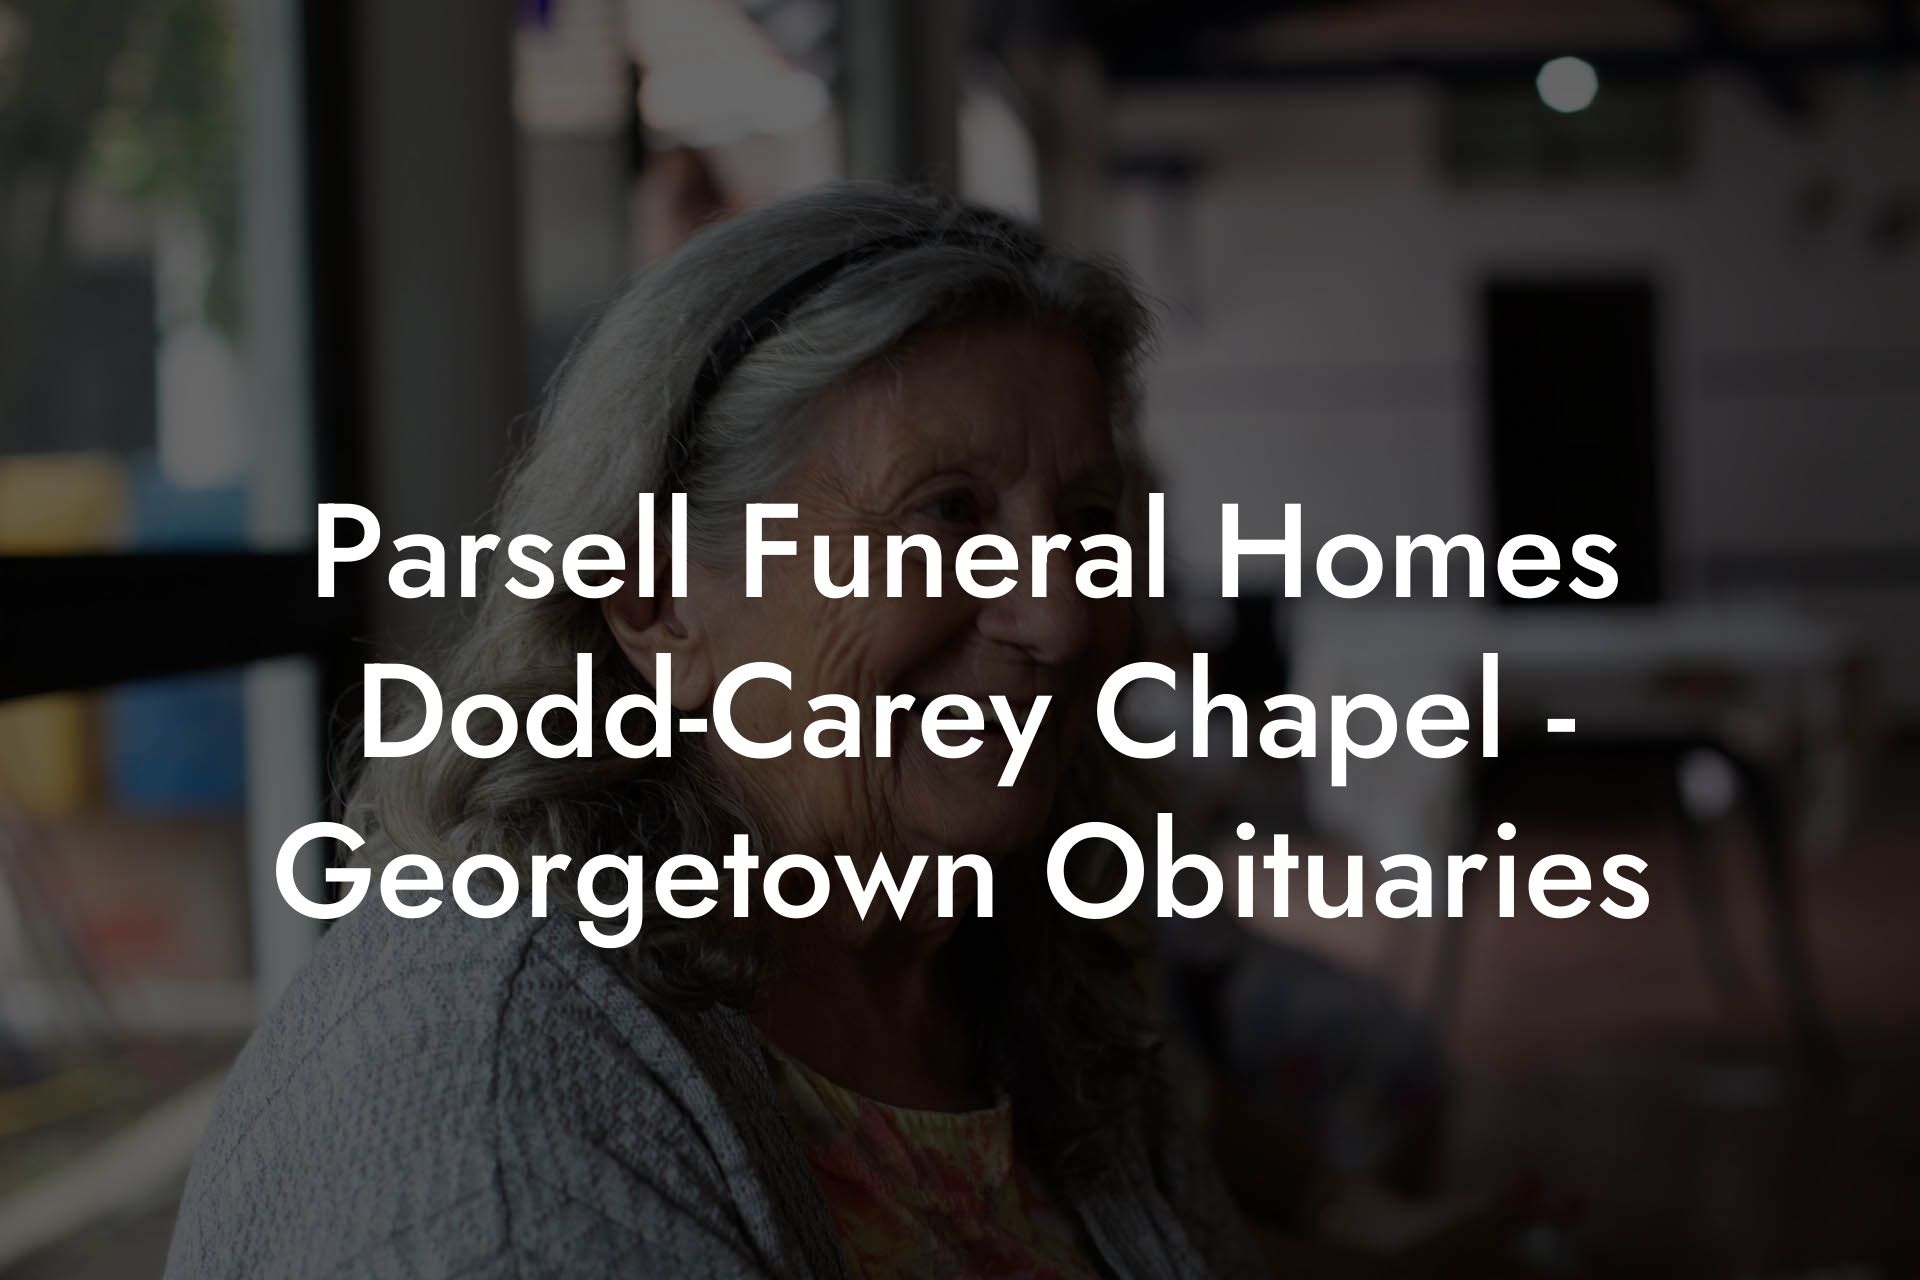 Parsell Funeral Homes Dodd-Carey Chapel - Georgetown Obituaries